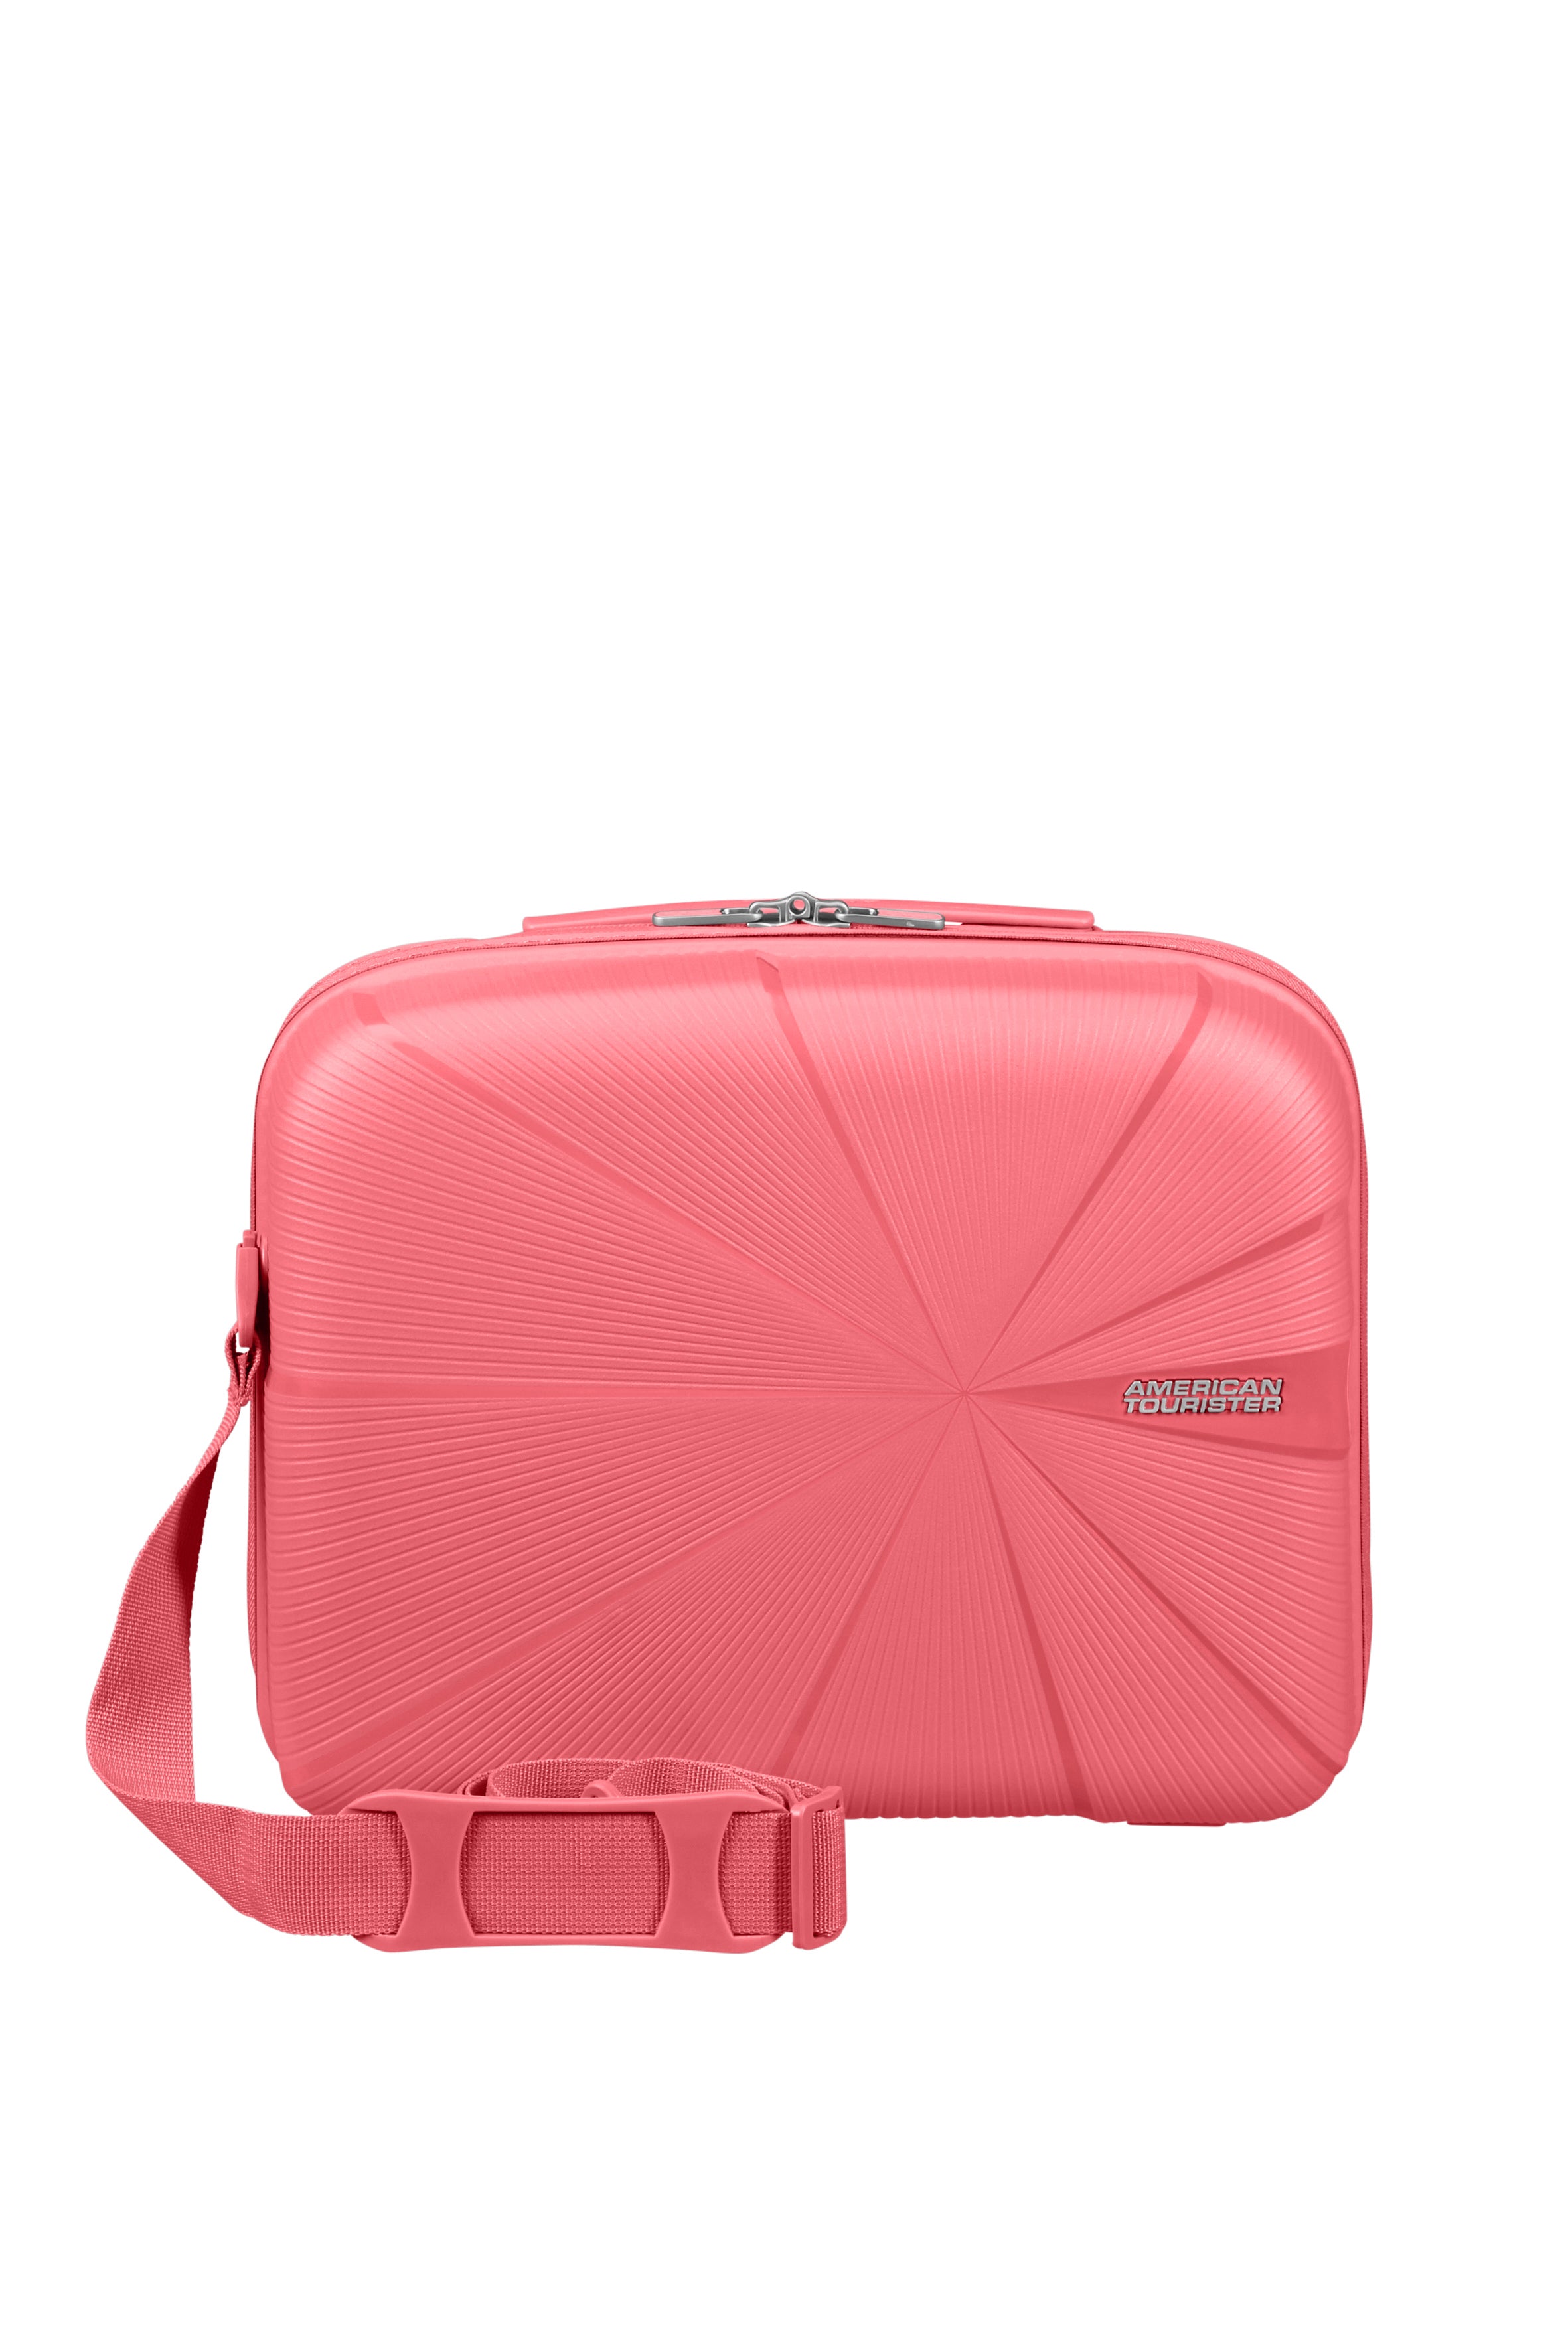 American Tourister - Star Vibe Beauty Case - Sun kissed Coral